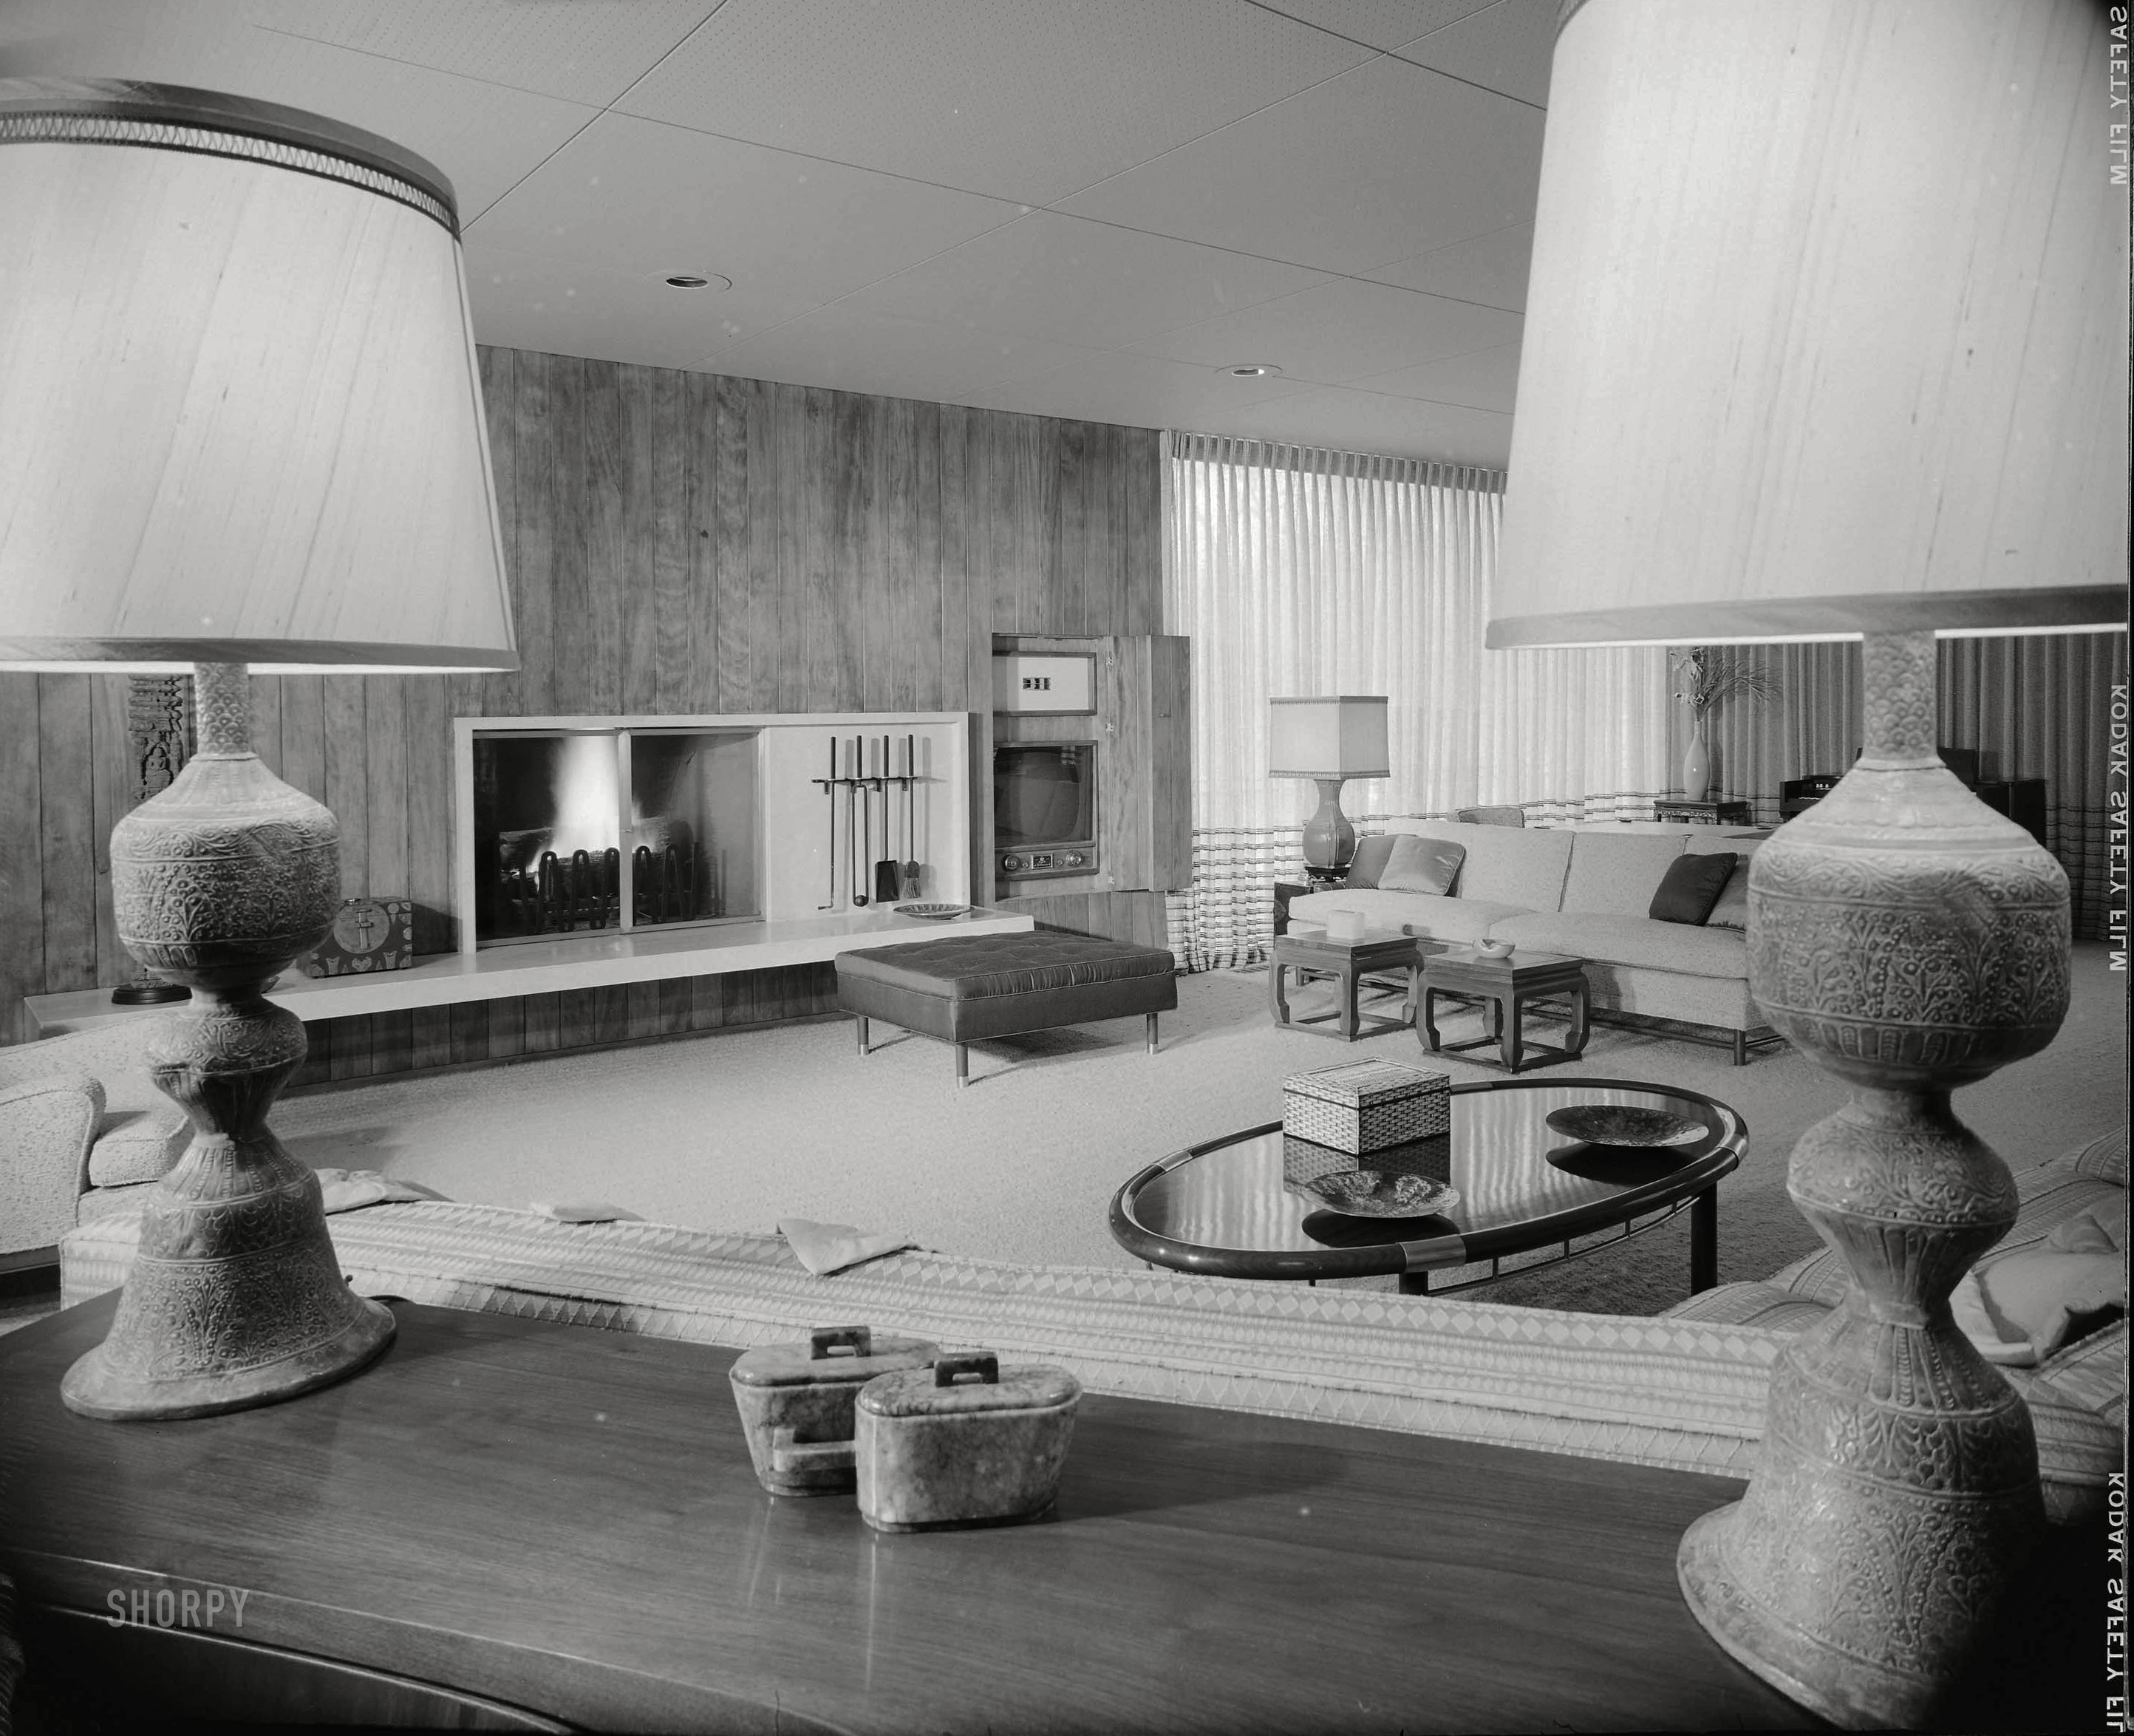 1956. "Hayes residence, Kessler Lake Drive, Dallas. Living room to fireplace. Architects: Prinz & Brooks." Our second look at Chevrolet dealer Earl Hayes' midcentury manse with the tacky acoustic-tile ceiling. Photo by Maynard L. Parker for House Beautiful. Source: Huntington Library. View full size.